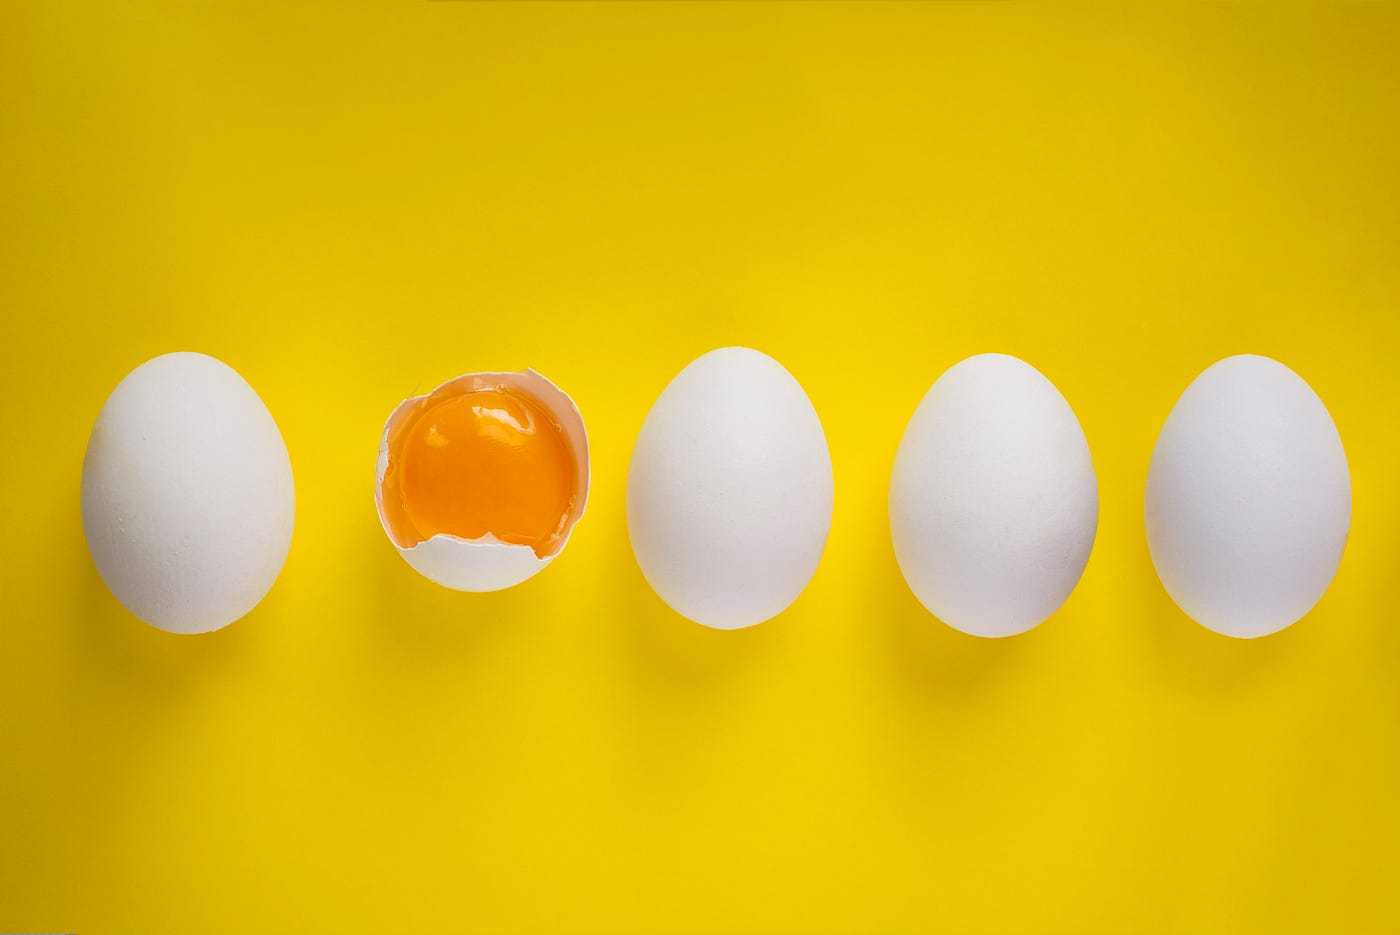 The Great Egg Debate - Are Eggs Healthy or Unhealthy?